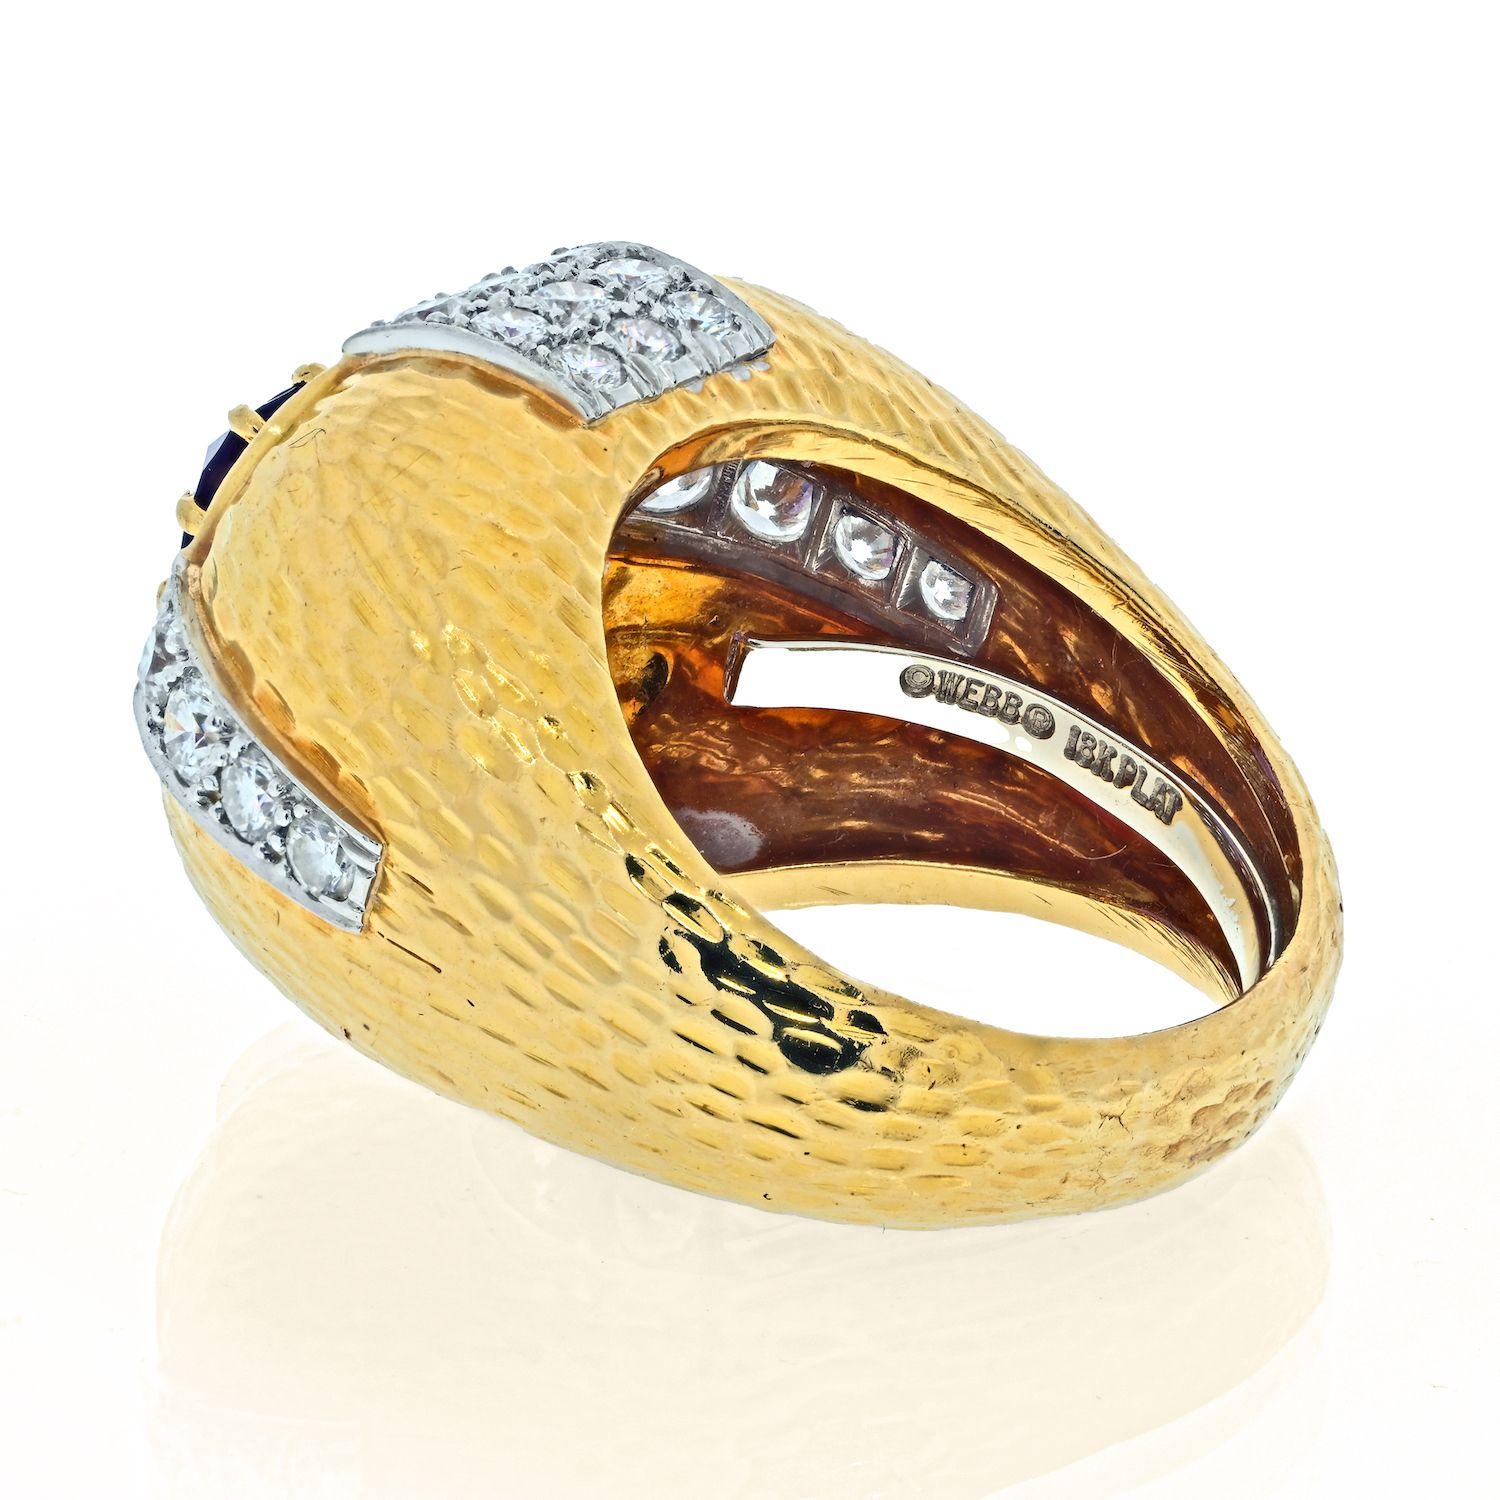 Webb is well known for his love of yellow gold — and his bold use of colour in general. His designs not only stand the test of time, but are unique concepts in their own right, and have reinvented fine jewelry as bold statement. Today, David Webb